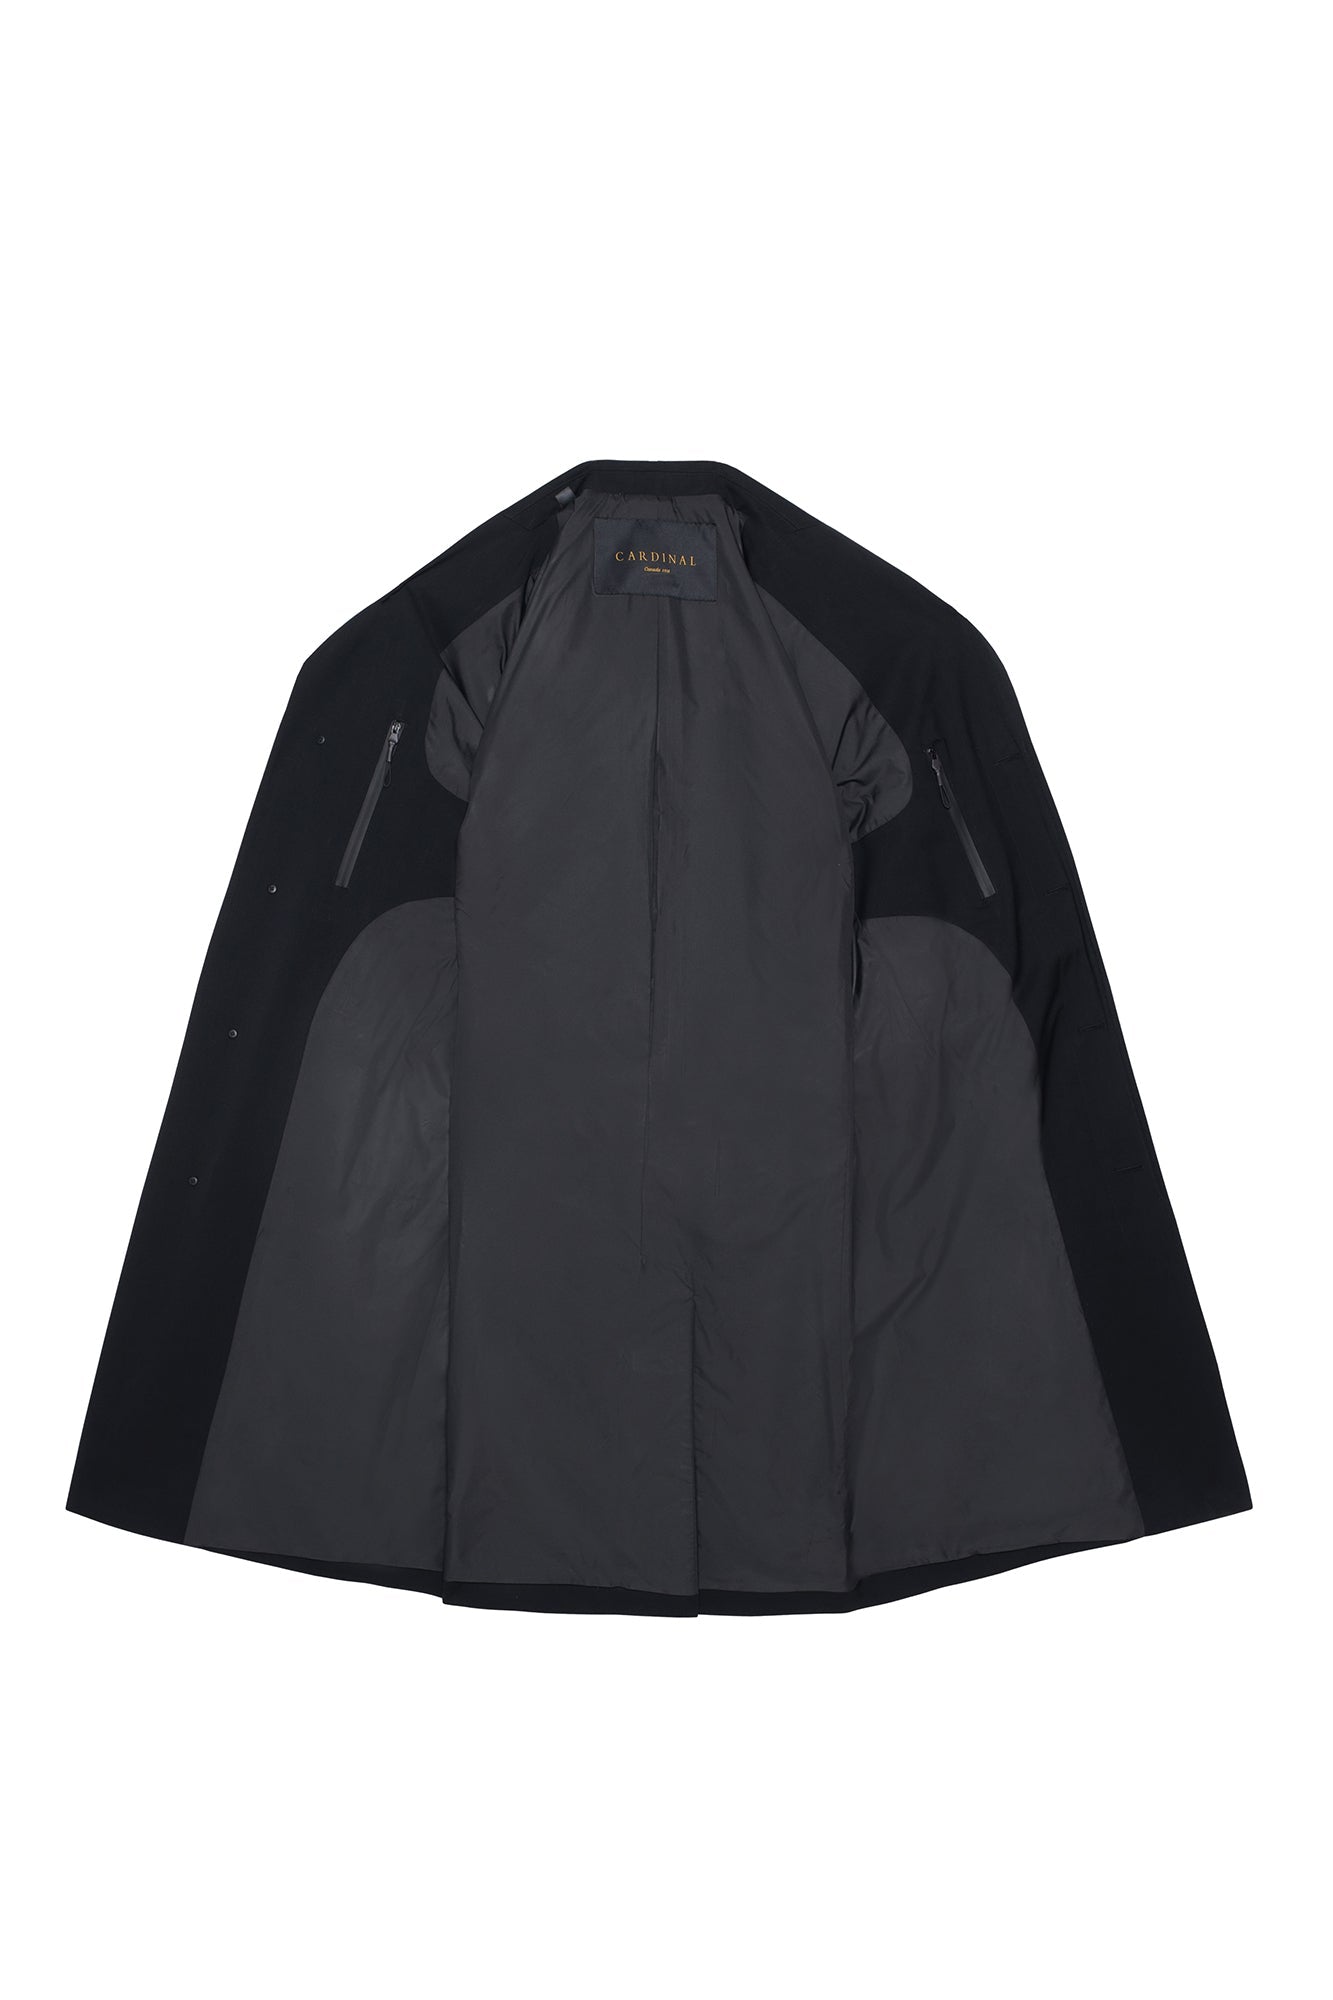 LIMITED EDITION: MAXWELL BLACK BELTED RAINCOAT - MENS - Cardinal of Canada-US-LIMITED EDITION: MAXWELL BLACK BELTED RAINCOAT 41.5 INCH LENGTH